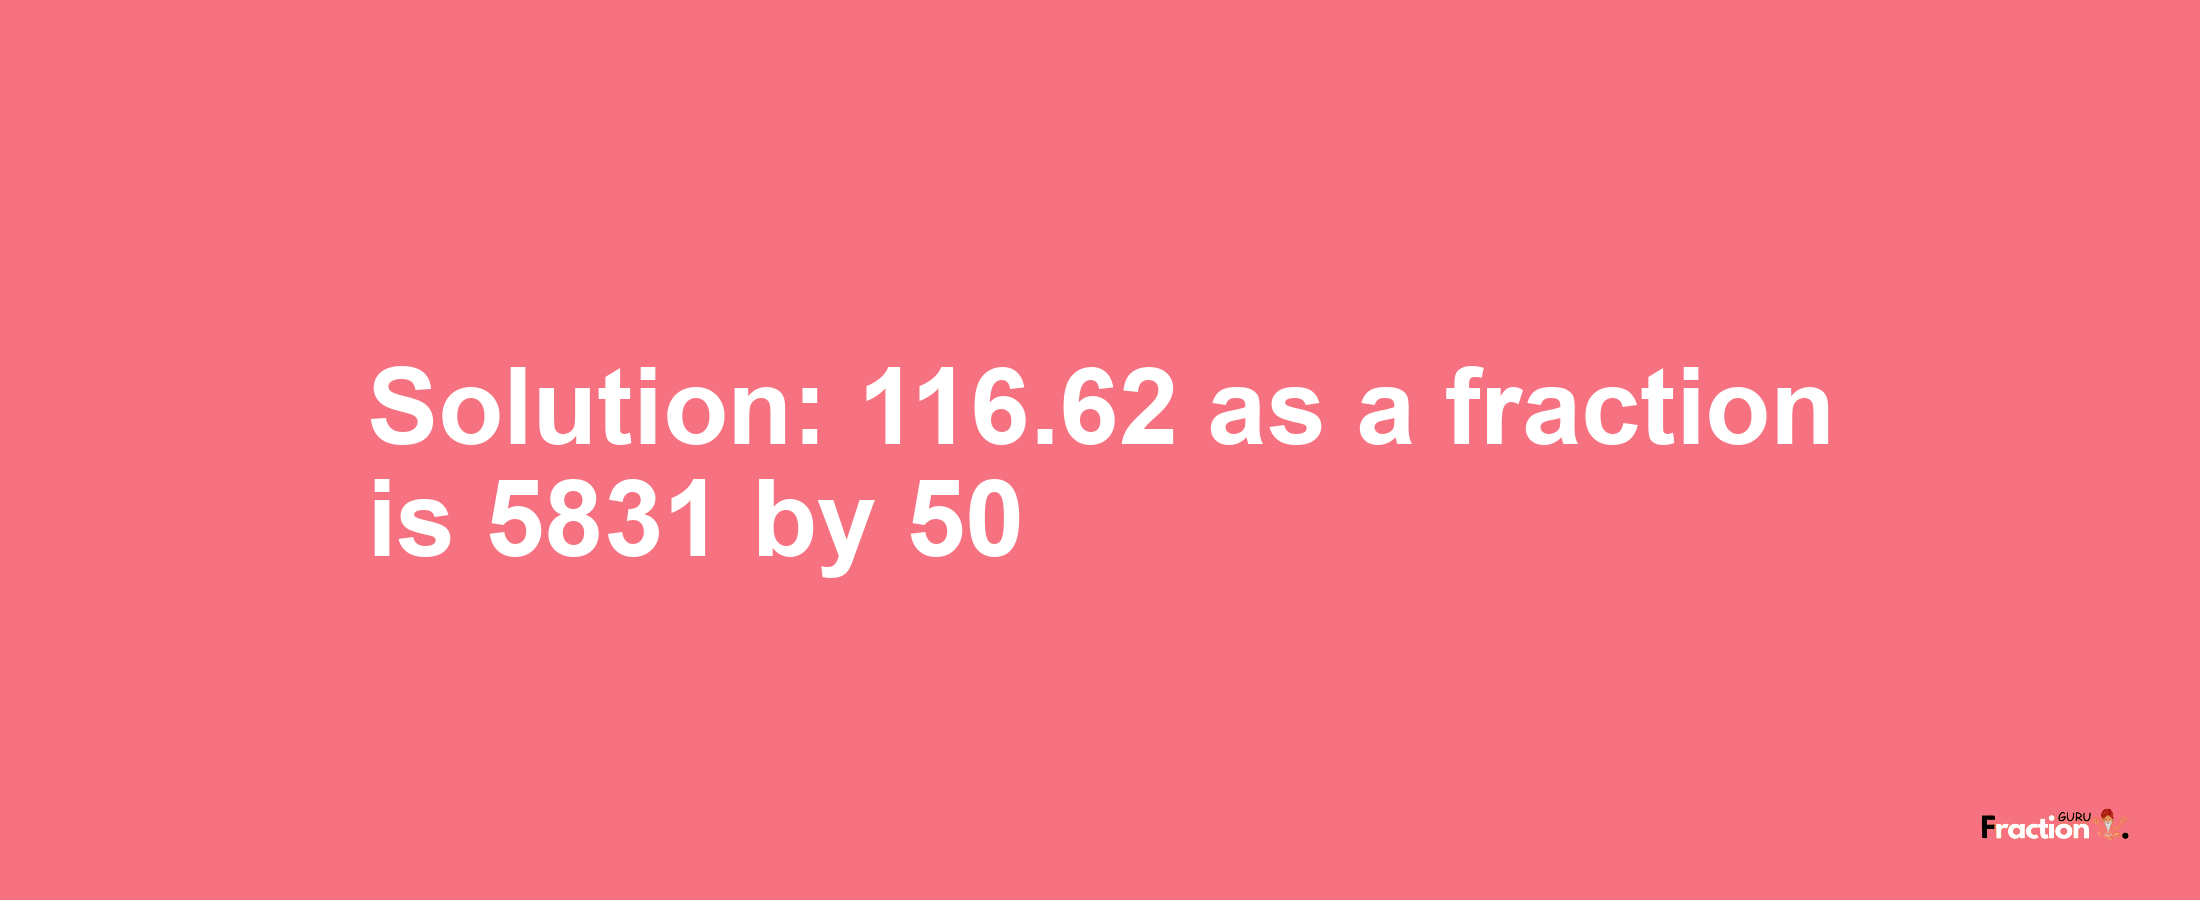 Solution:116.62 as a fraction is 5831/50